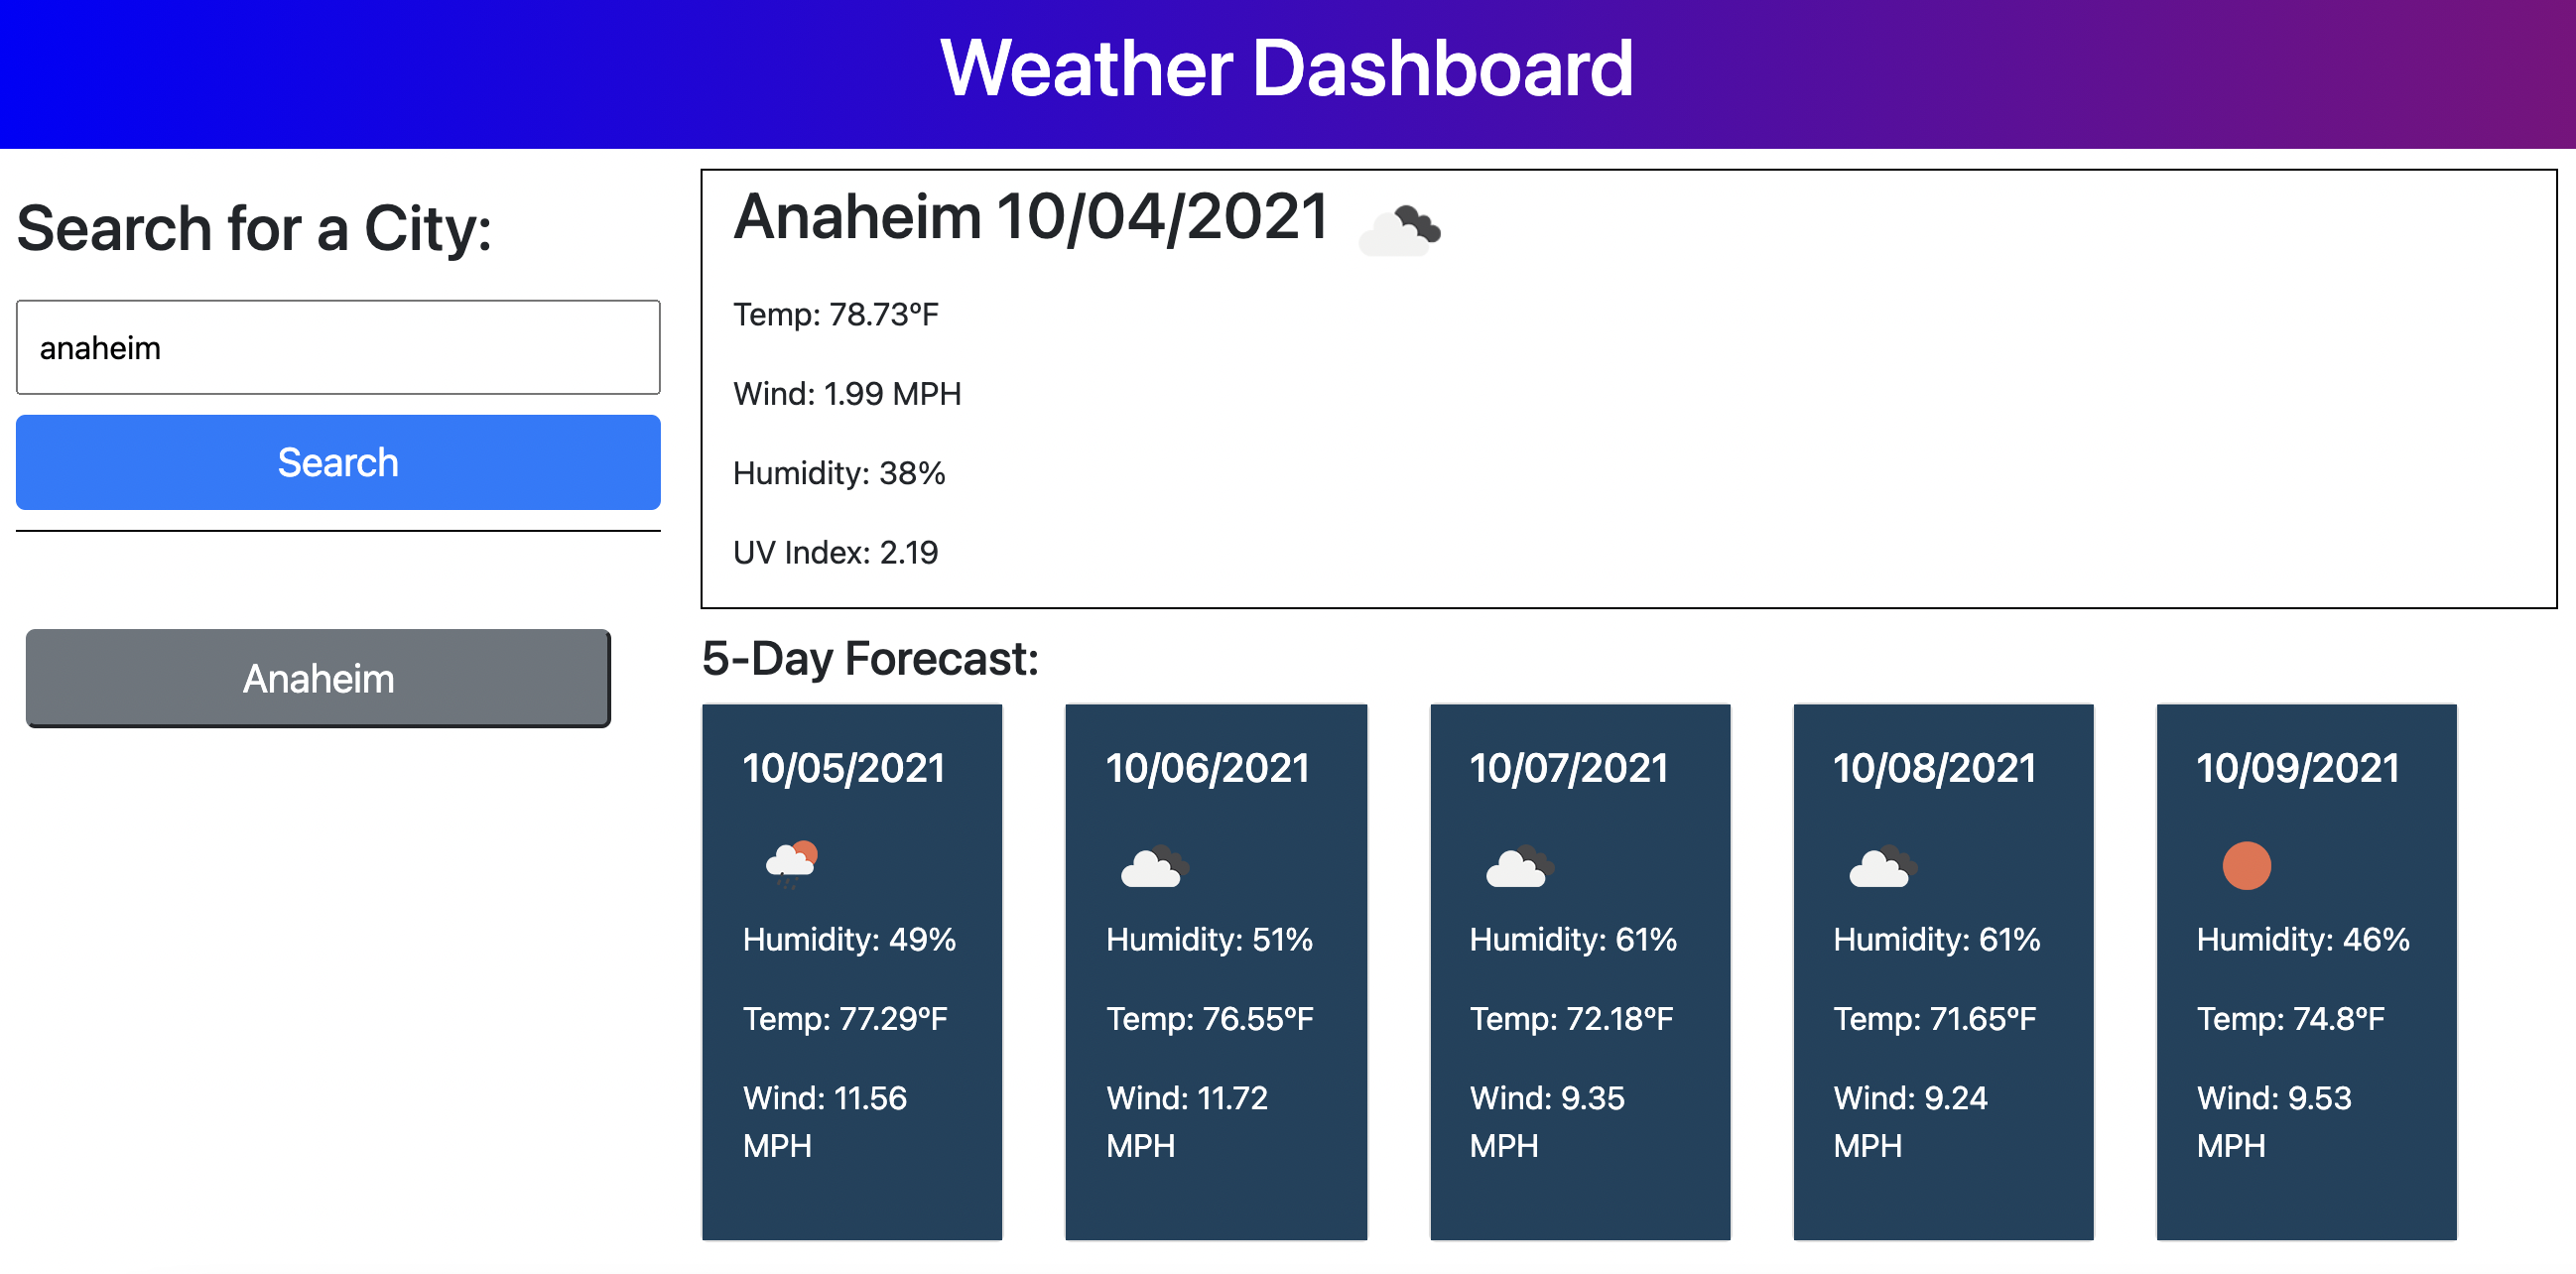 Website with weather information for Anaheim and a button labeled "Anaheim" has appeared on the side